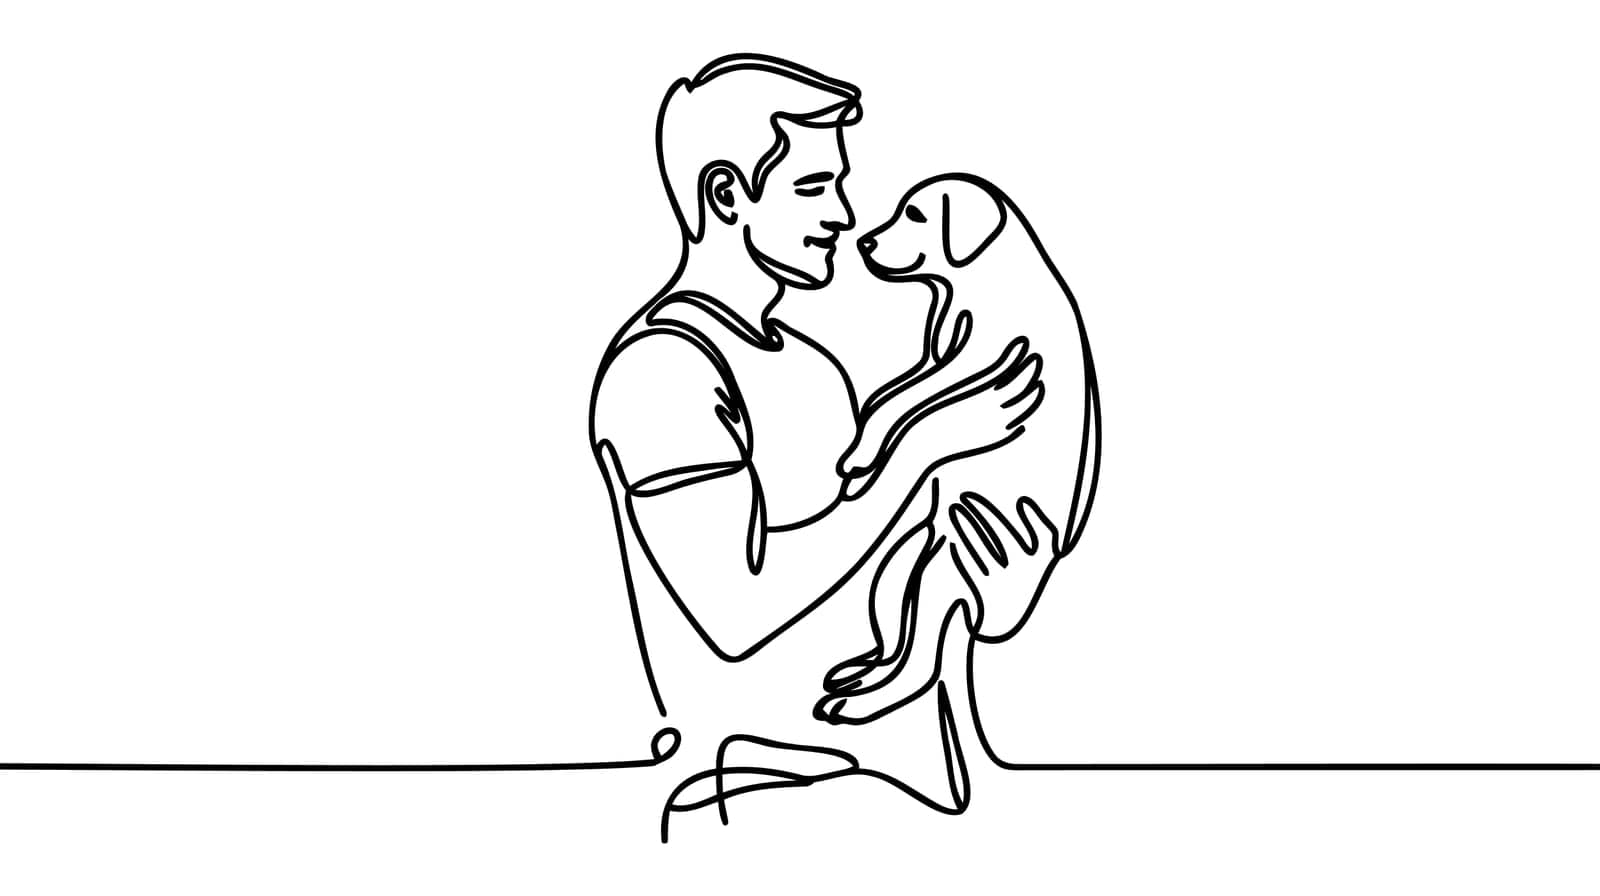 Man holds a dog in his hands or walks with him - one line art vector. concept dog owner, dog grooming.